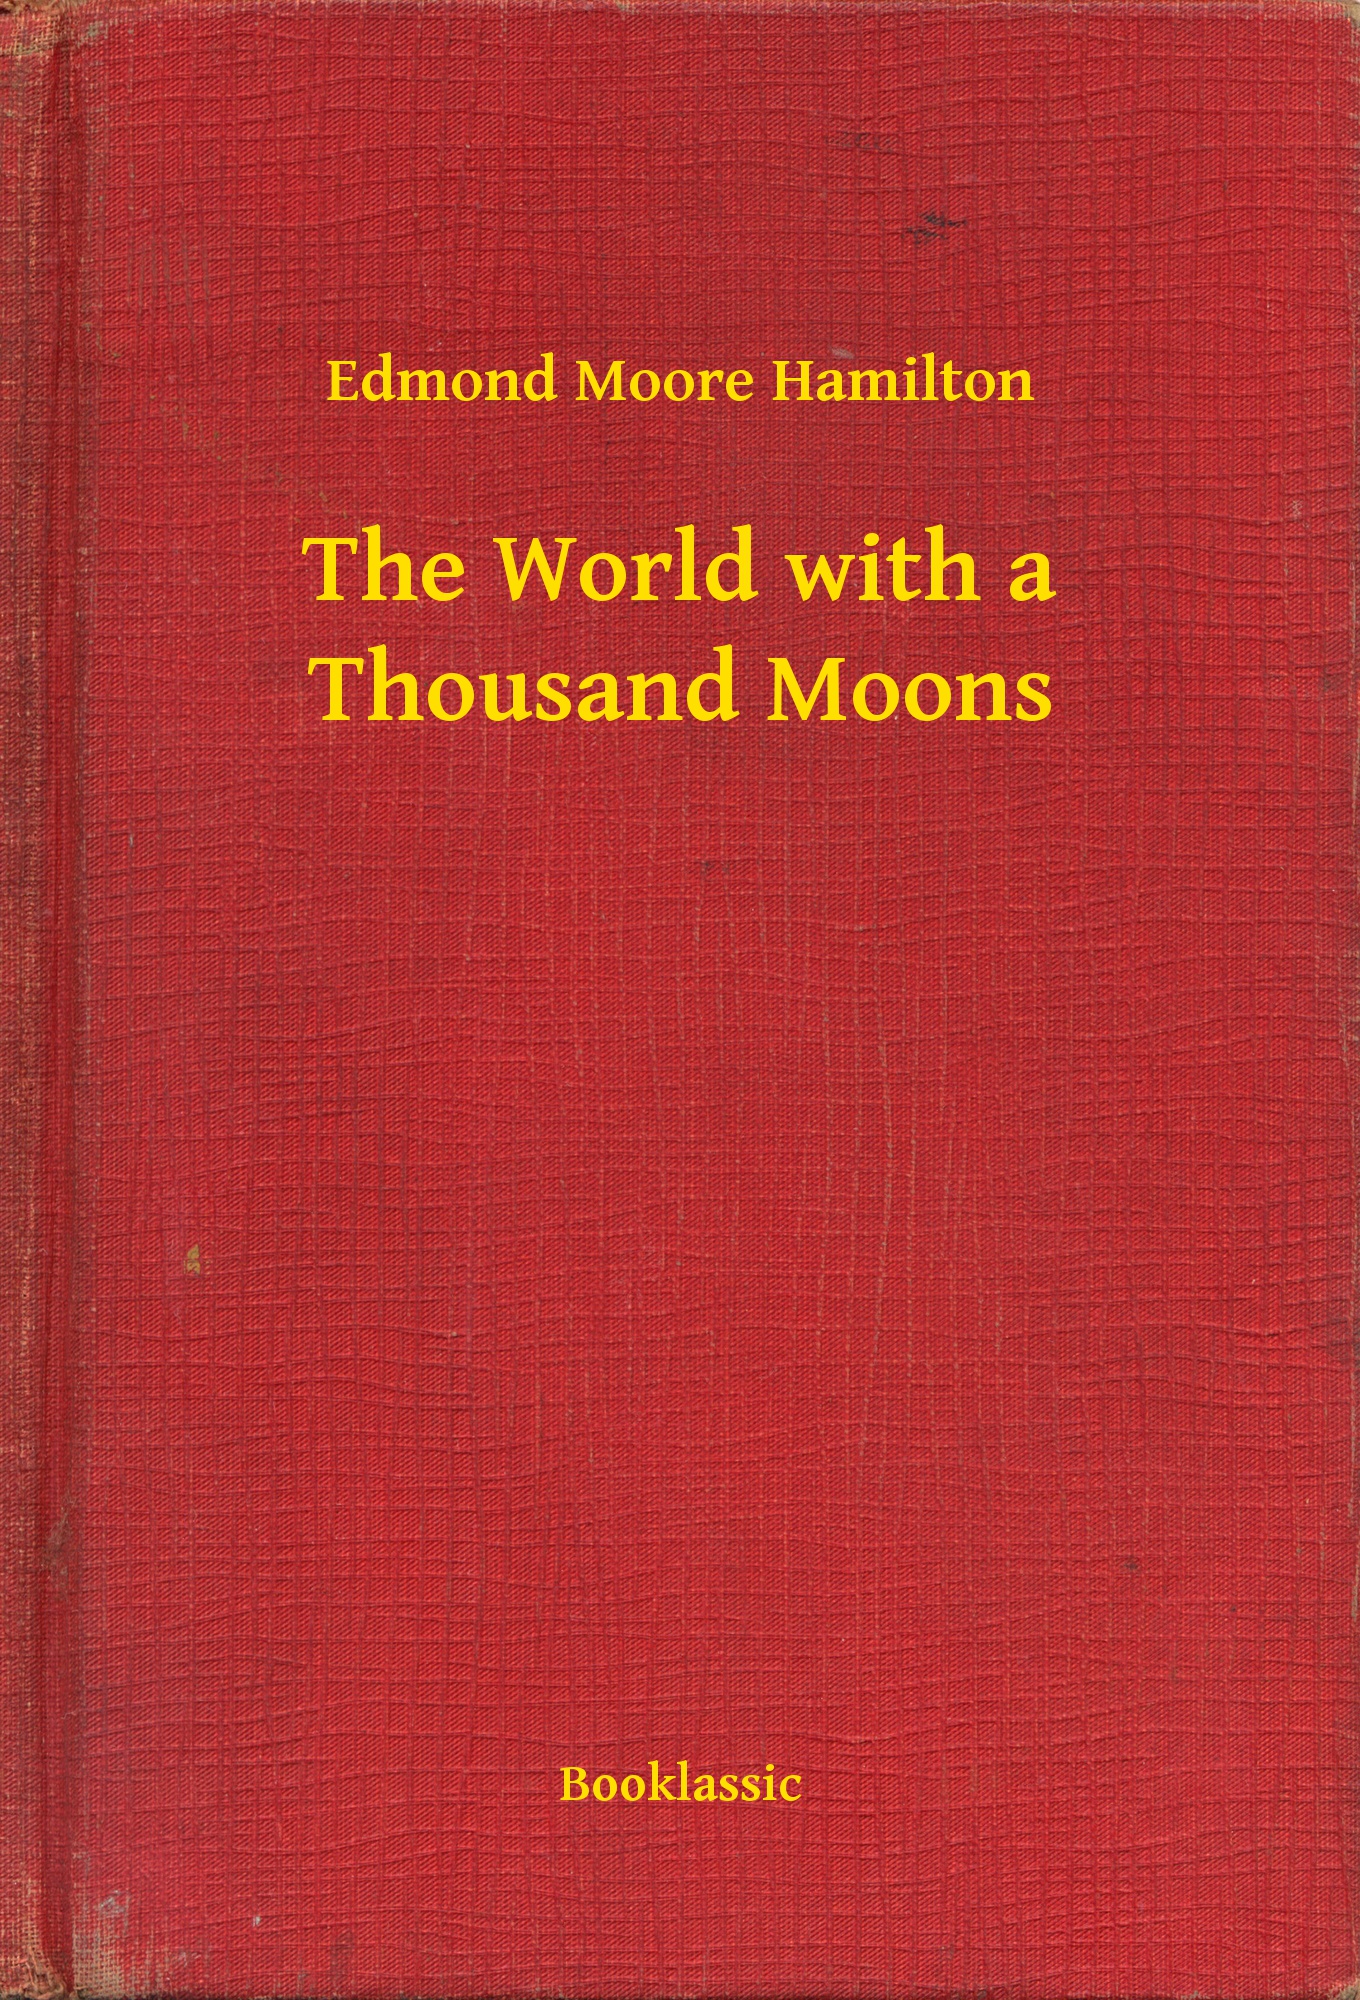 The World with a Thousand Moons